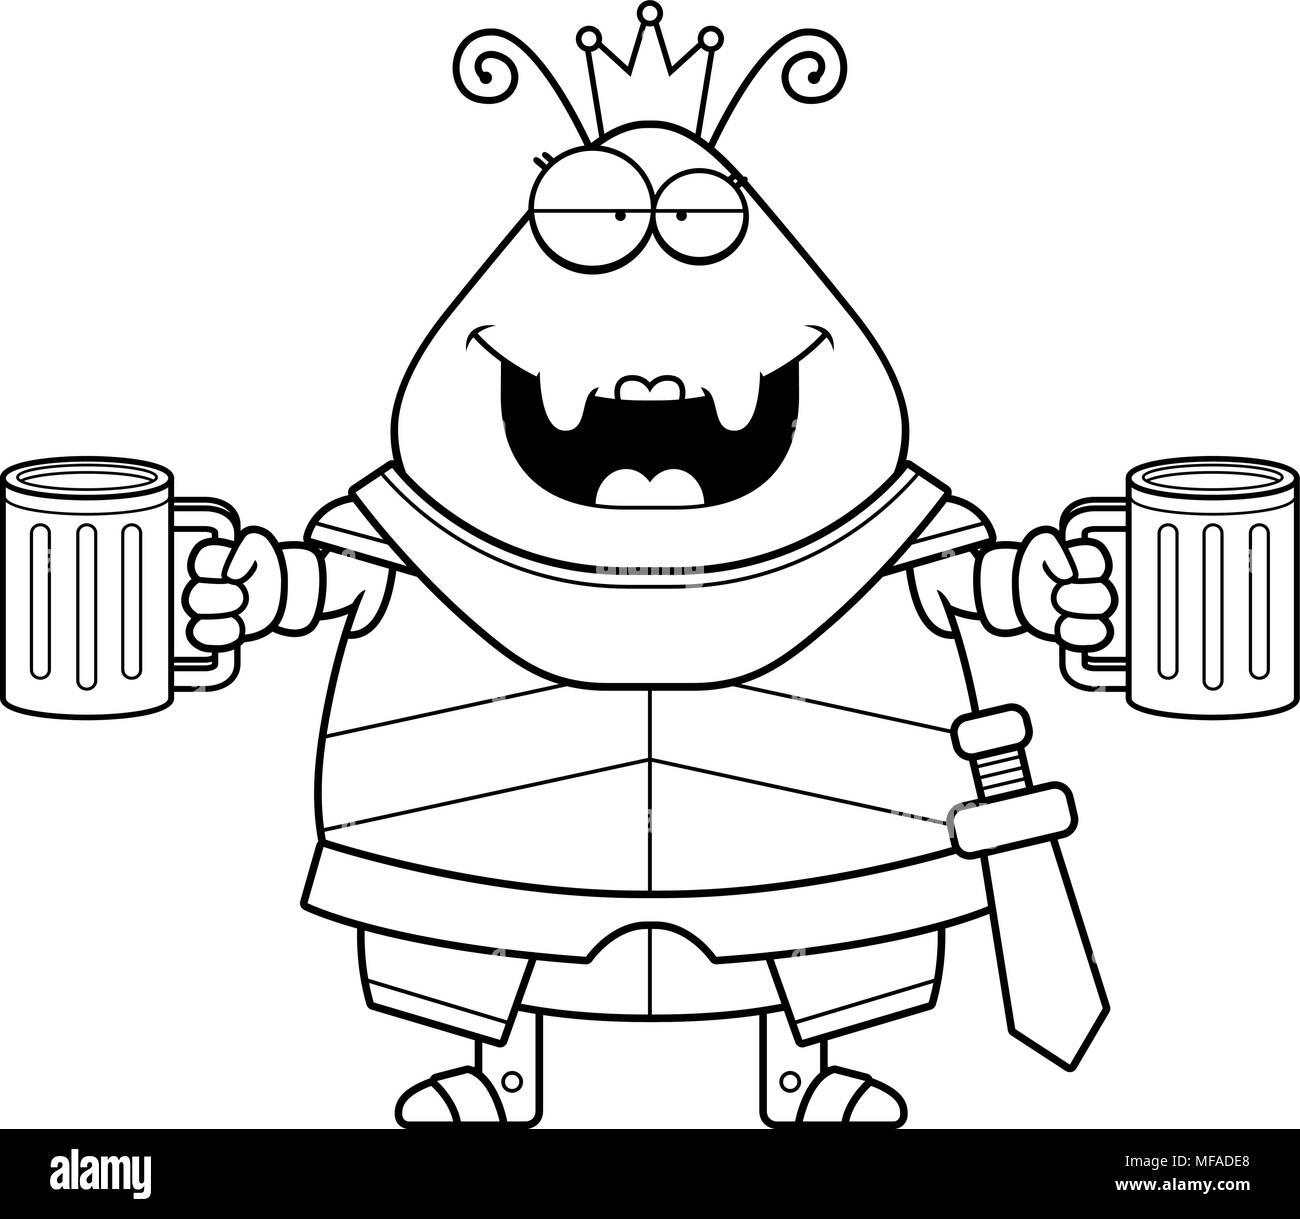 A cartoon illustration of an ant queen in armor looking drunk. Stock Vector